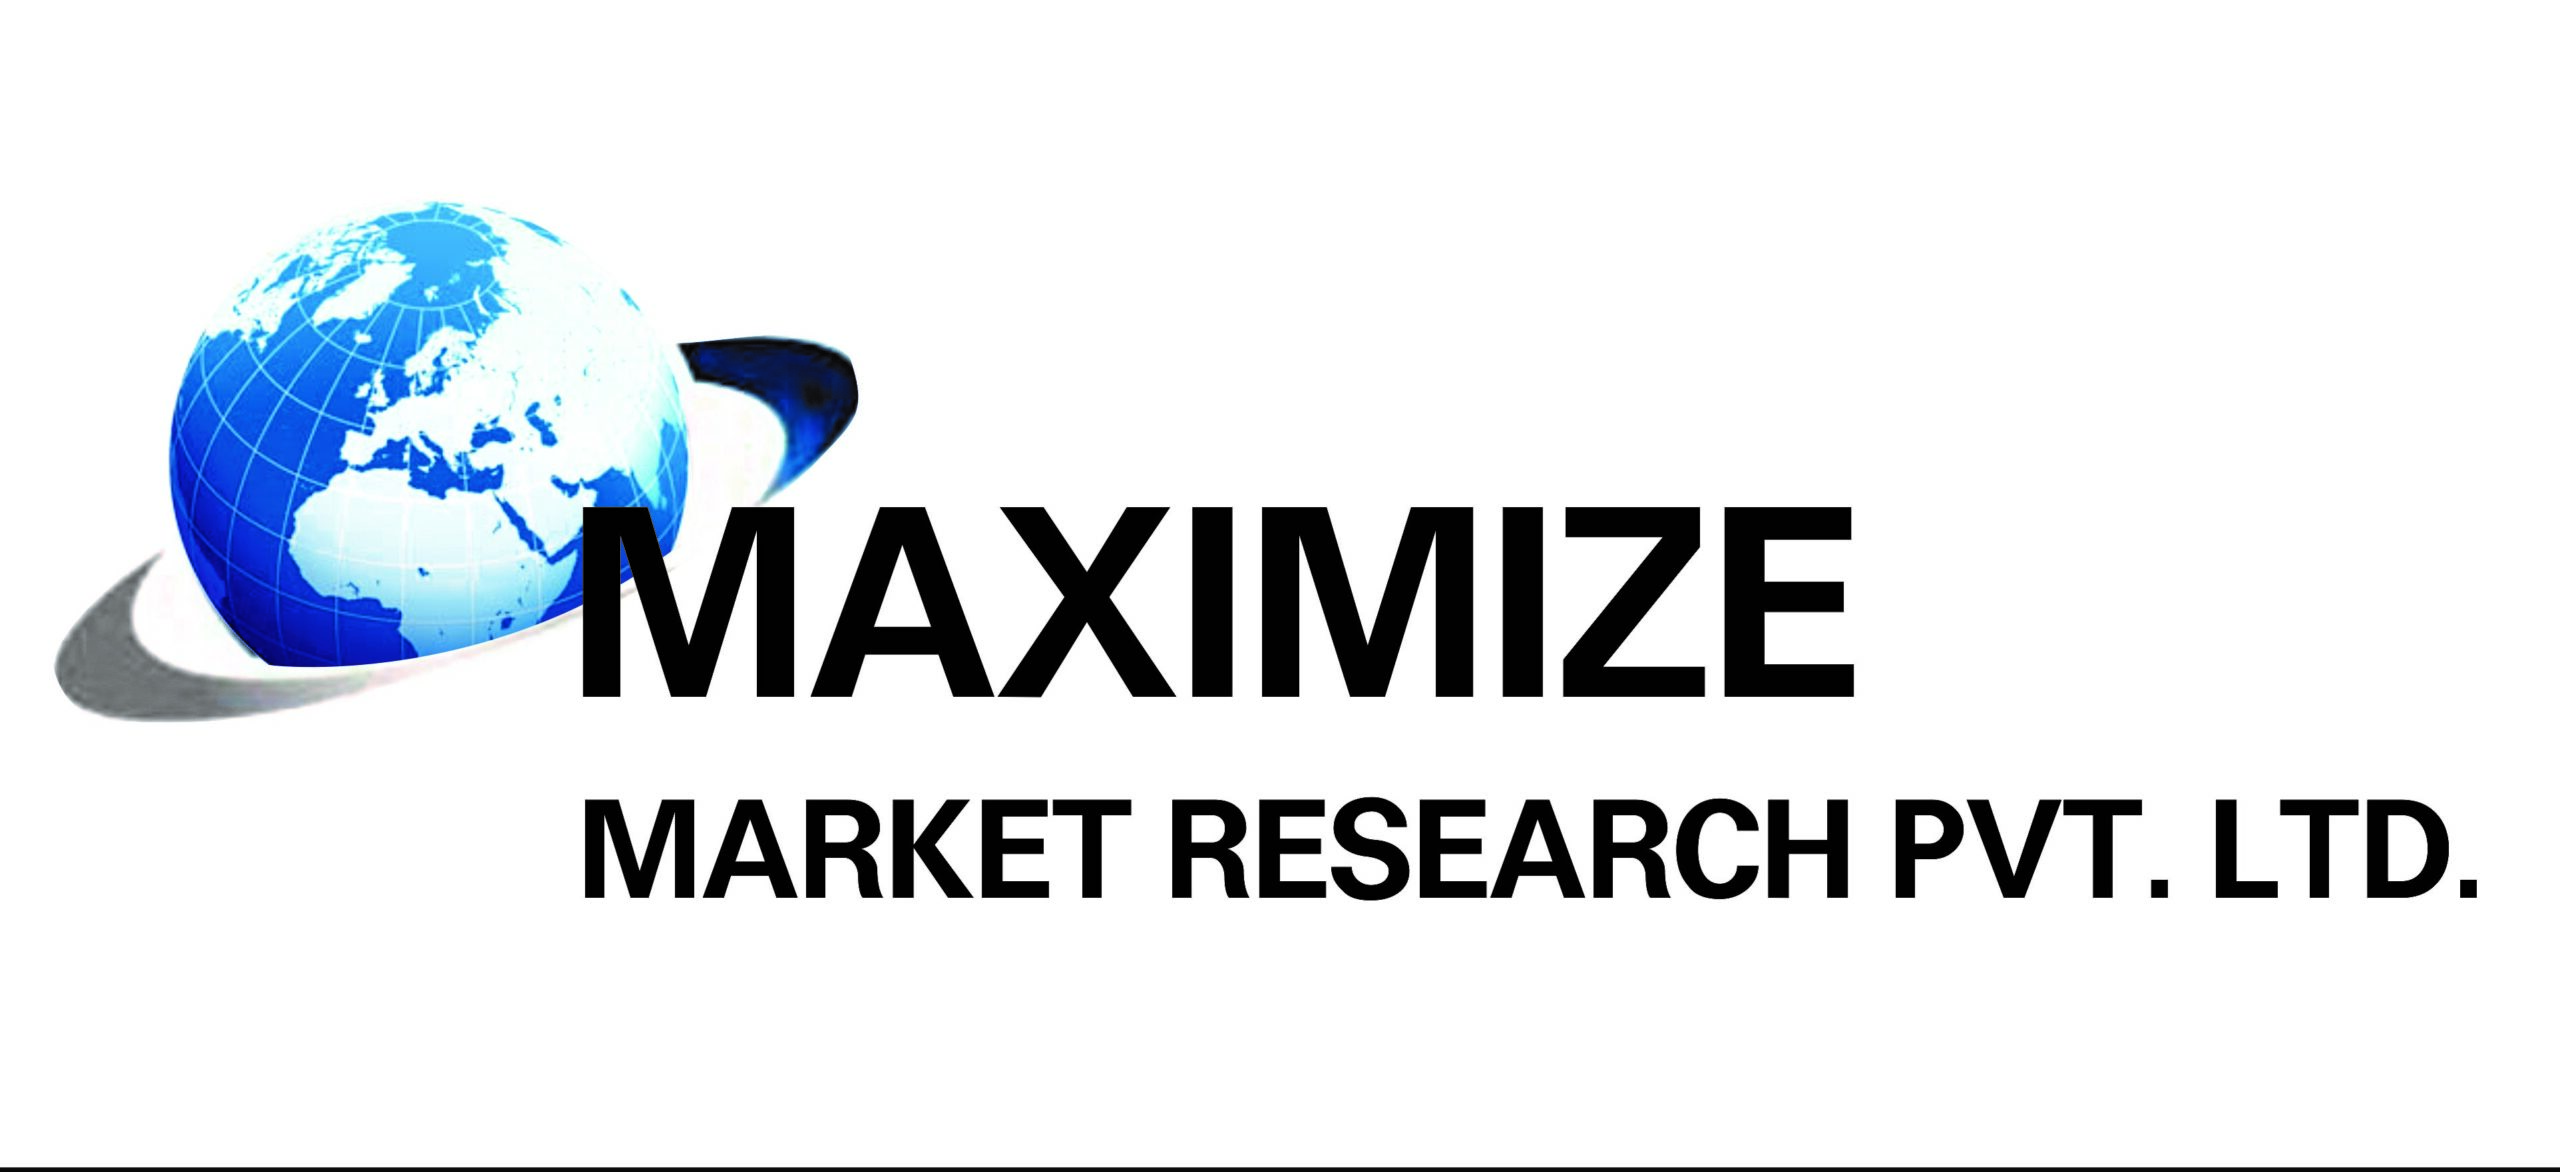 UK Artificial Intelligence Market Size and Share Forecast from 2018 to 2026